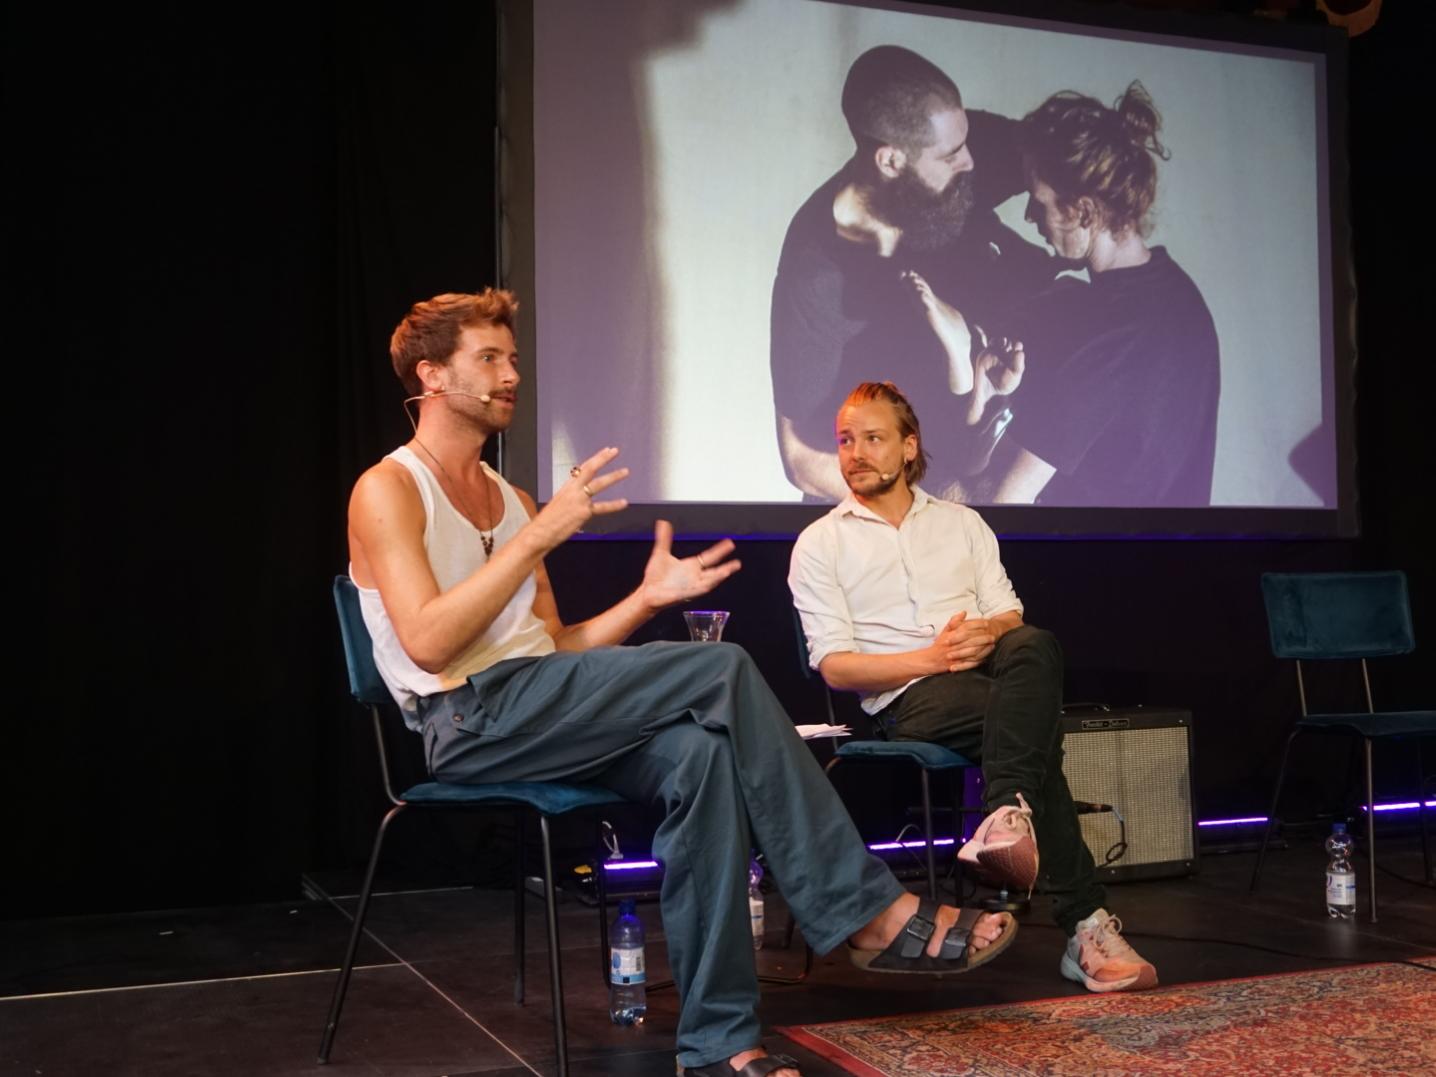 Two people, Philipp Cahrpit and Simon de Leeuw, on stage, with a still from Cahrpit's performance on the background.